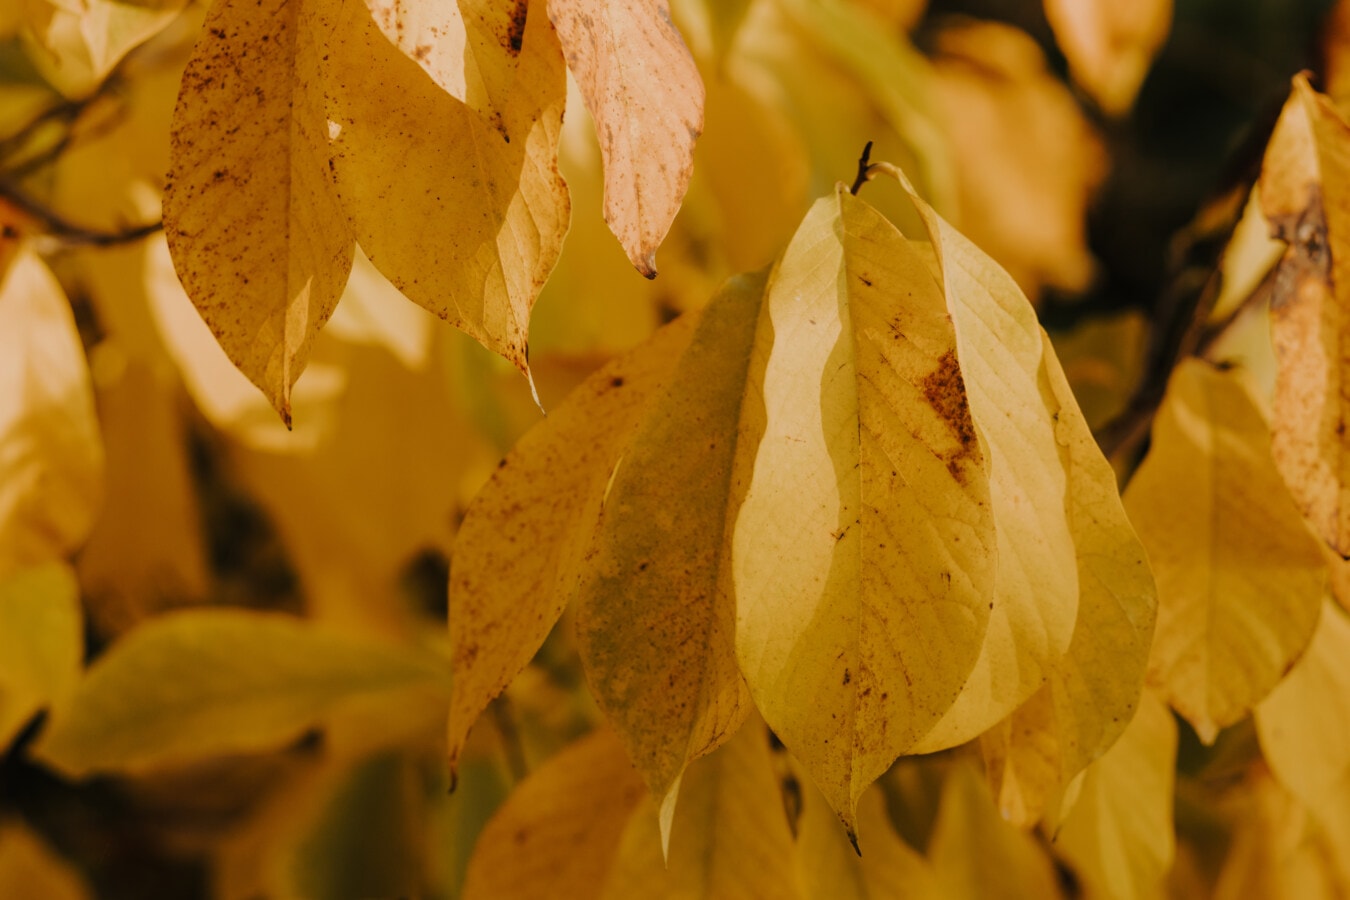 branches, yellowish brown, leaves, autumn season, close-up, plant, autumn, yellow, nature, leaf